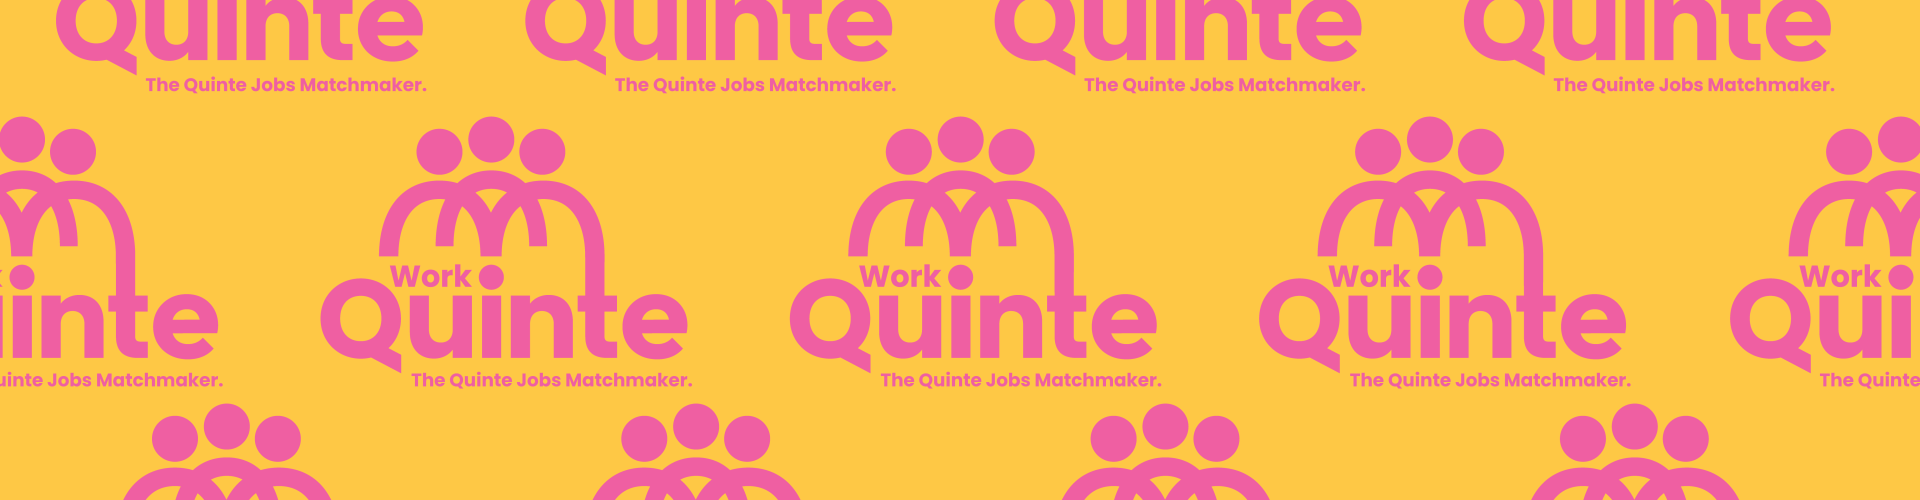 Orange background with pink Work in Quinte logo and The Quinte Jobs Matchmaker tagline.